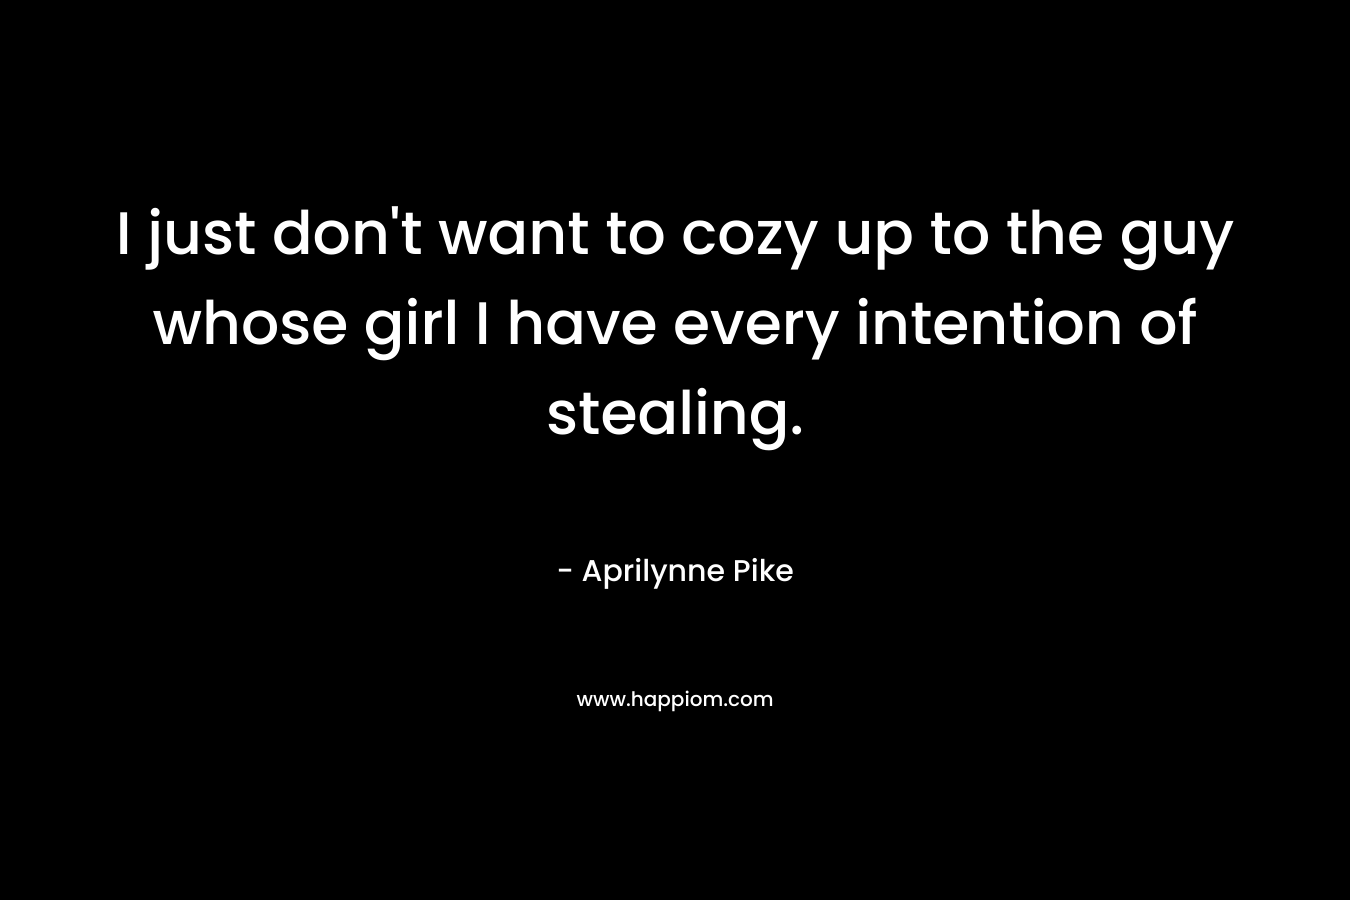 I just don't want to cozy up to the guy whose girl I have every intention of stealing.